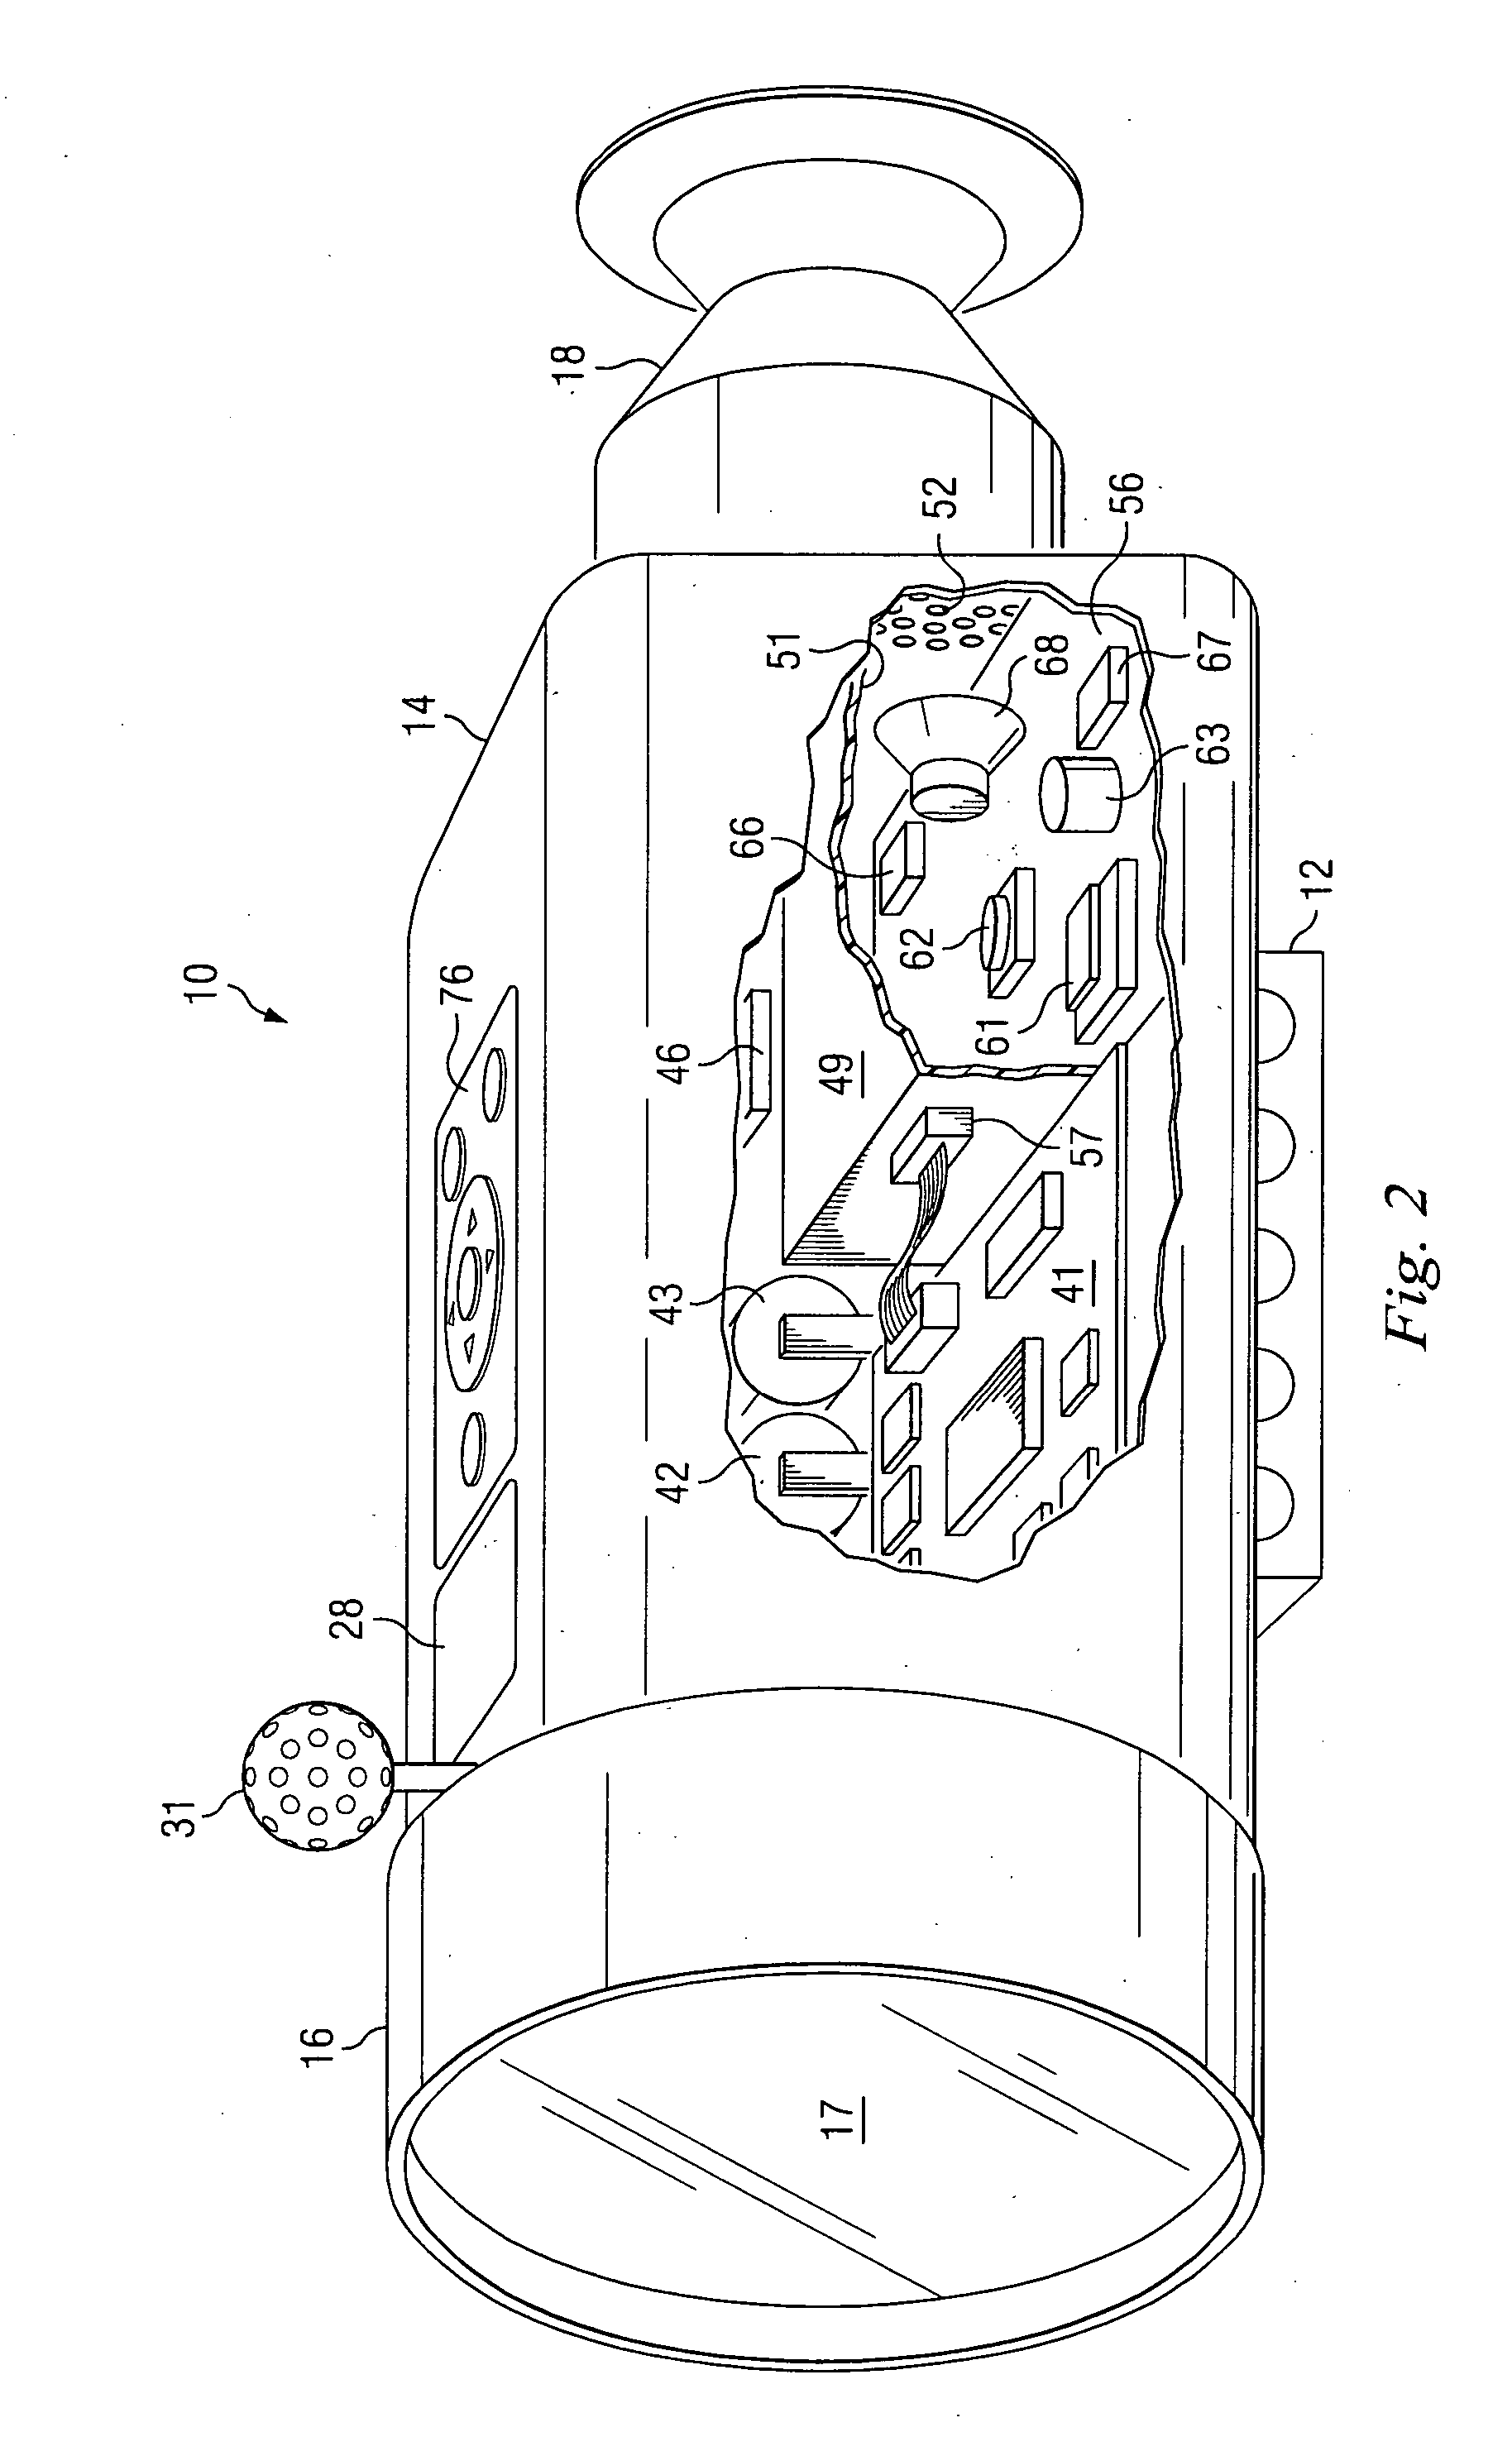 Electronic sight for firearm, and method of operating same